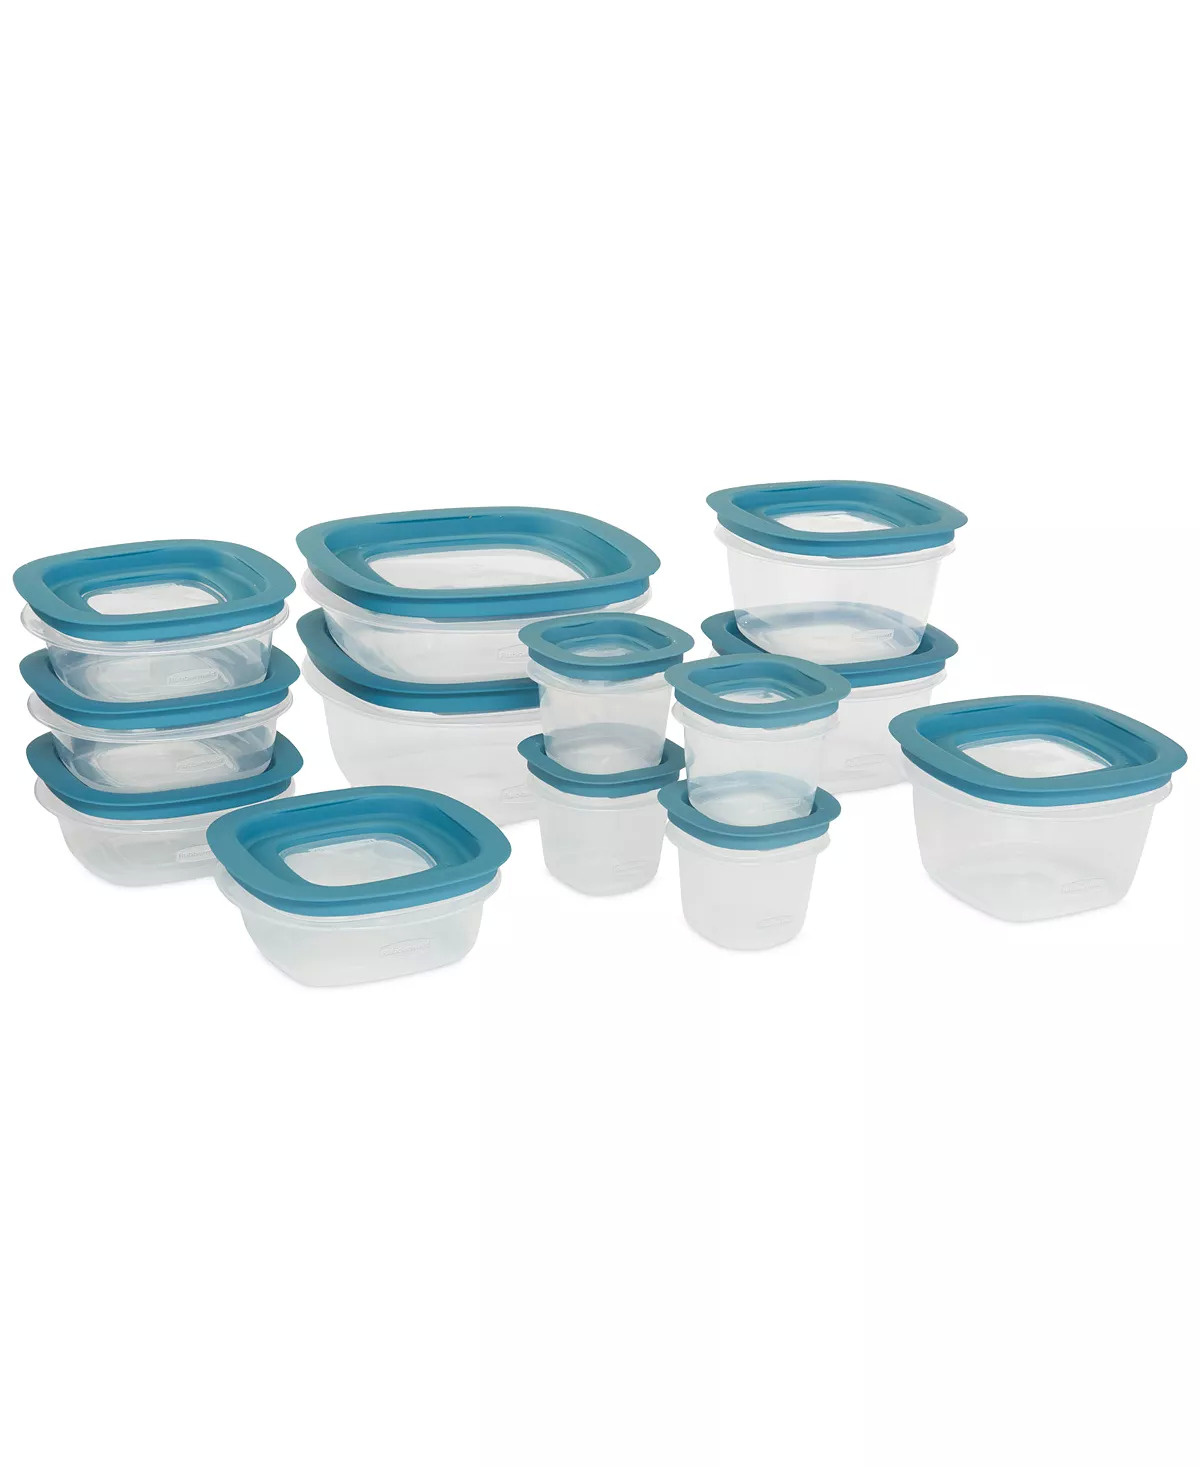 26-Piece Rubbermaid Flex & Seal Food Storage Containers & Lids Set $17.50 + + Free Store Pickup at Macy's or F/S on Orders $25+